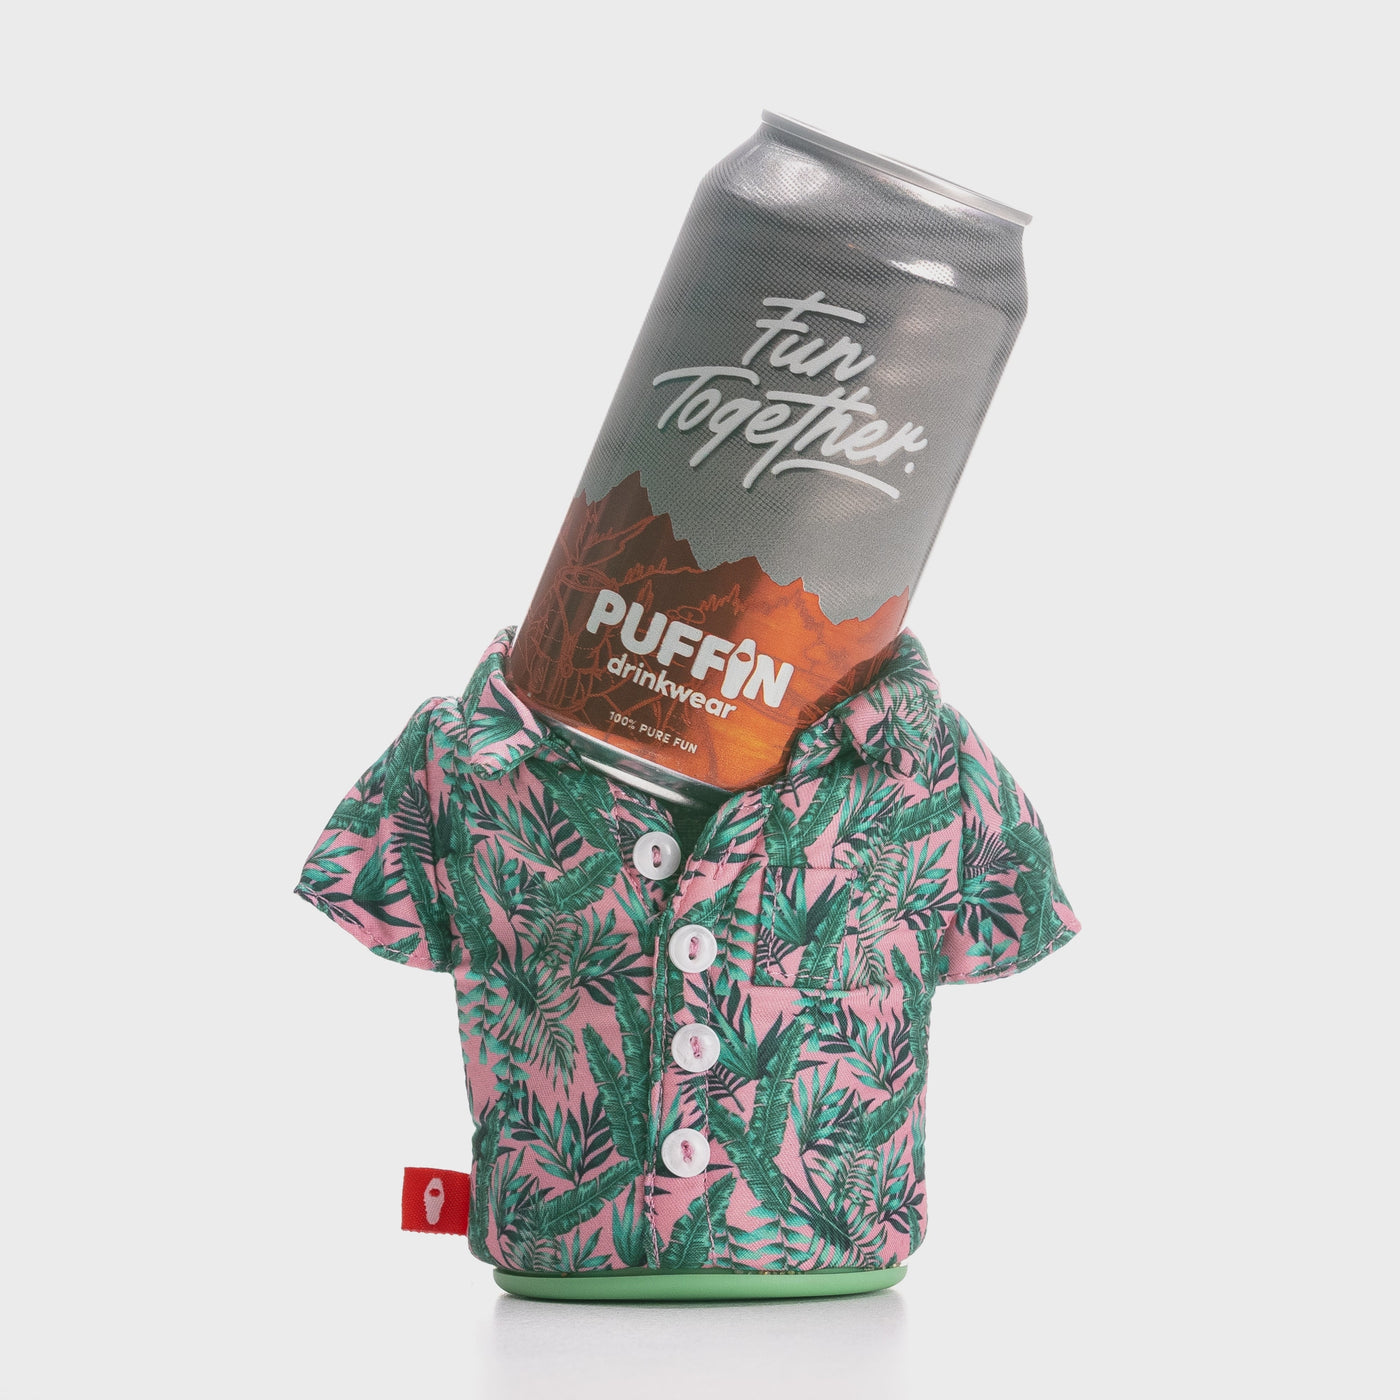 Stop motion showing the features of The Aloha by Puffin Drinkwear